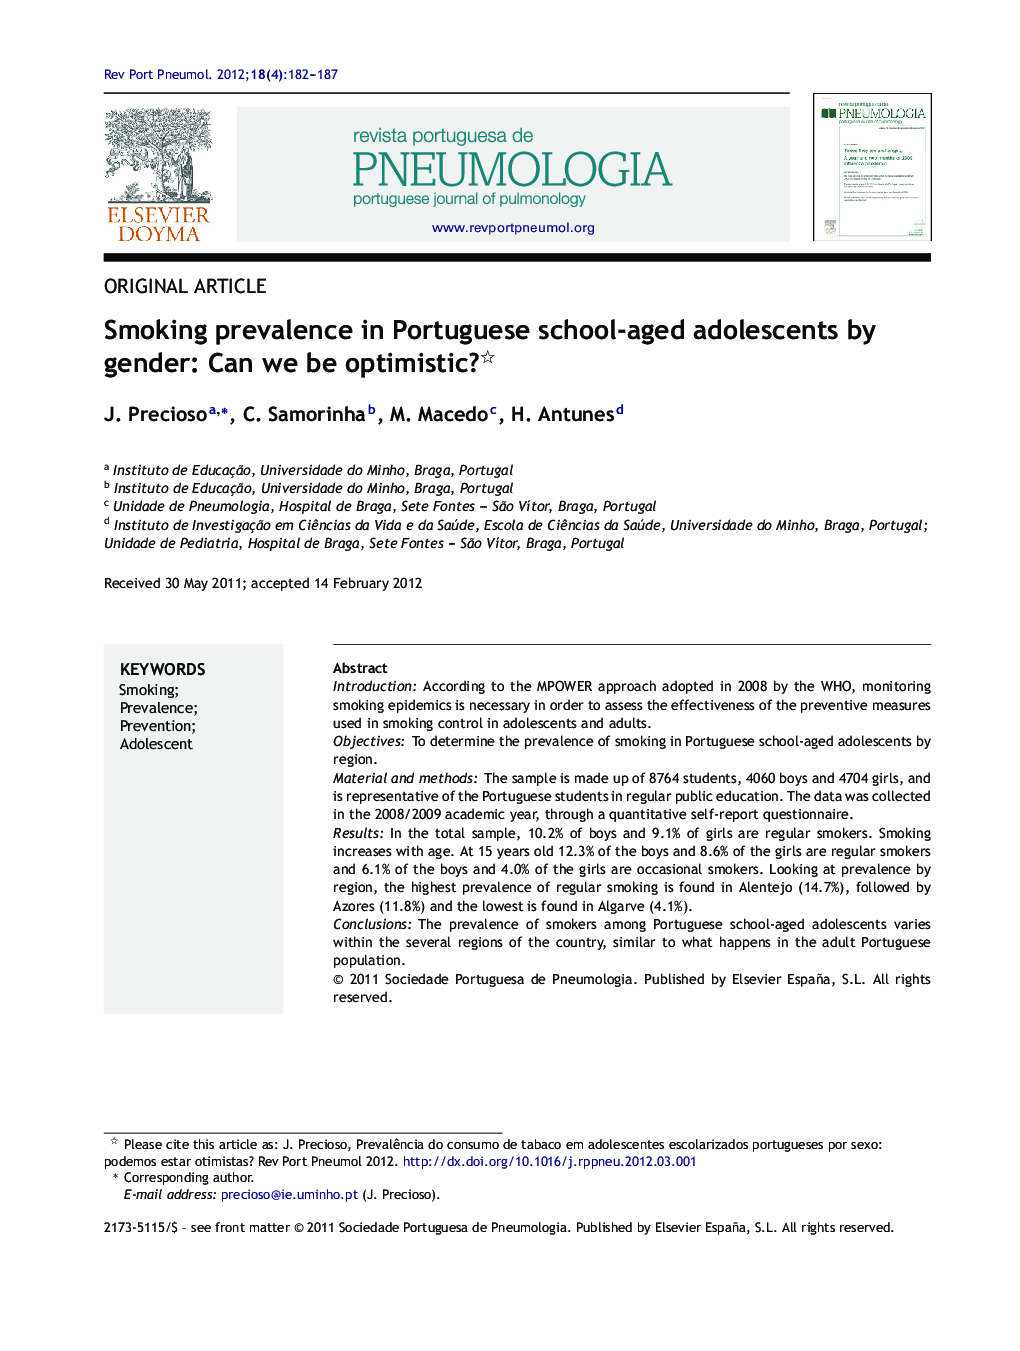 Smoking prevalence in Portuguese school-aged adolescents by gender: Can we be optimistic?